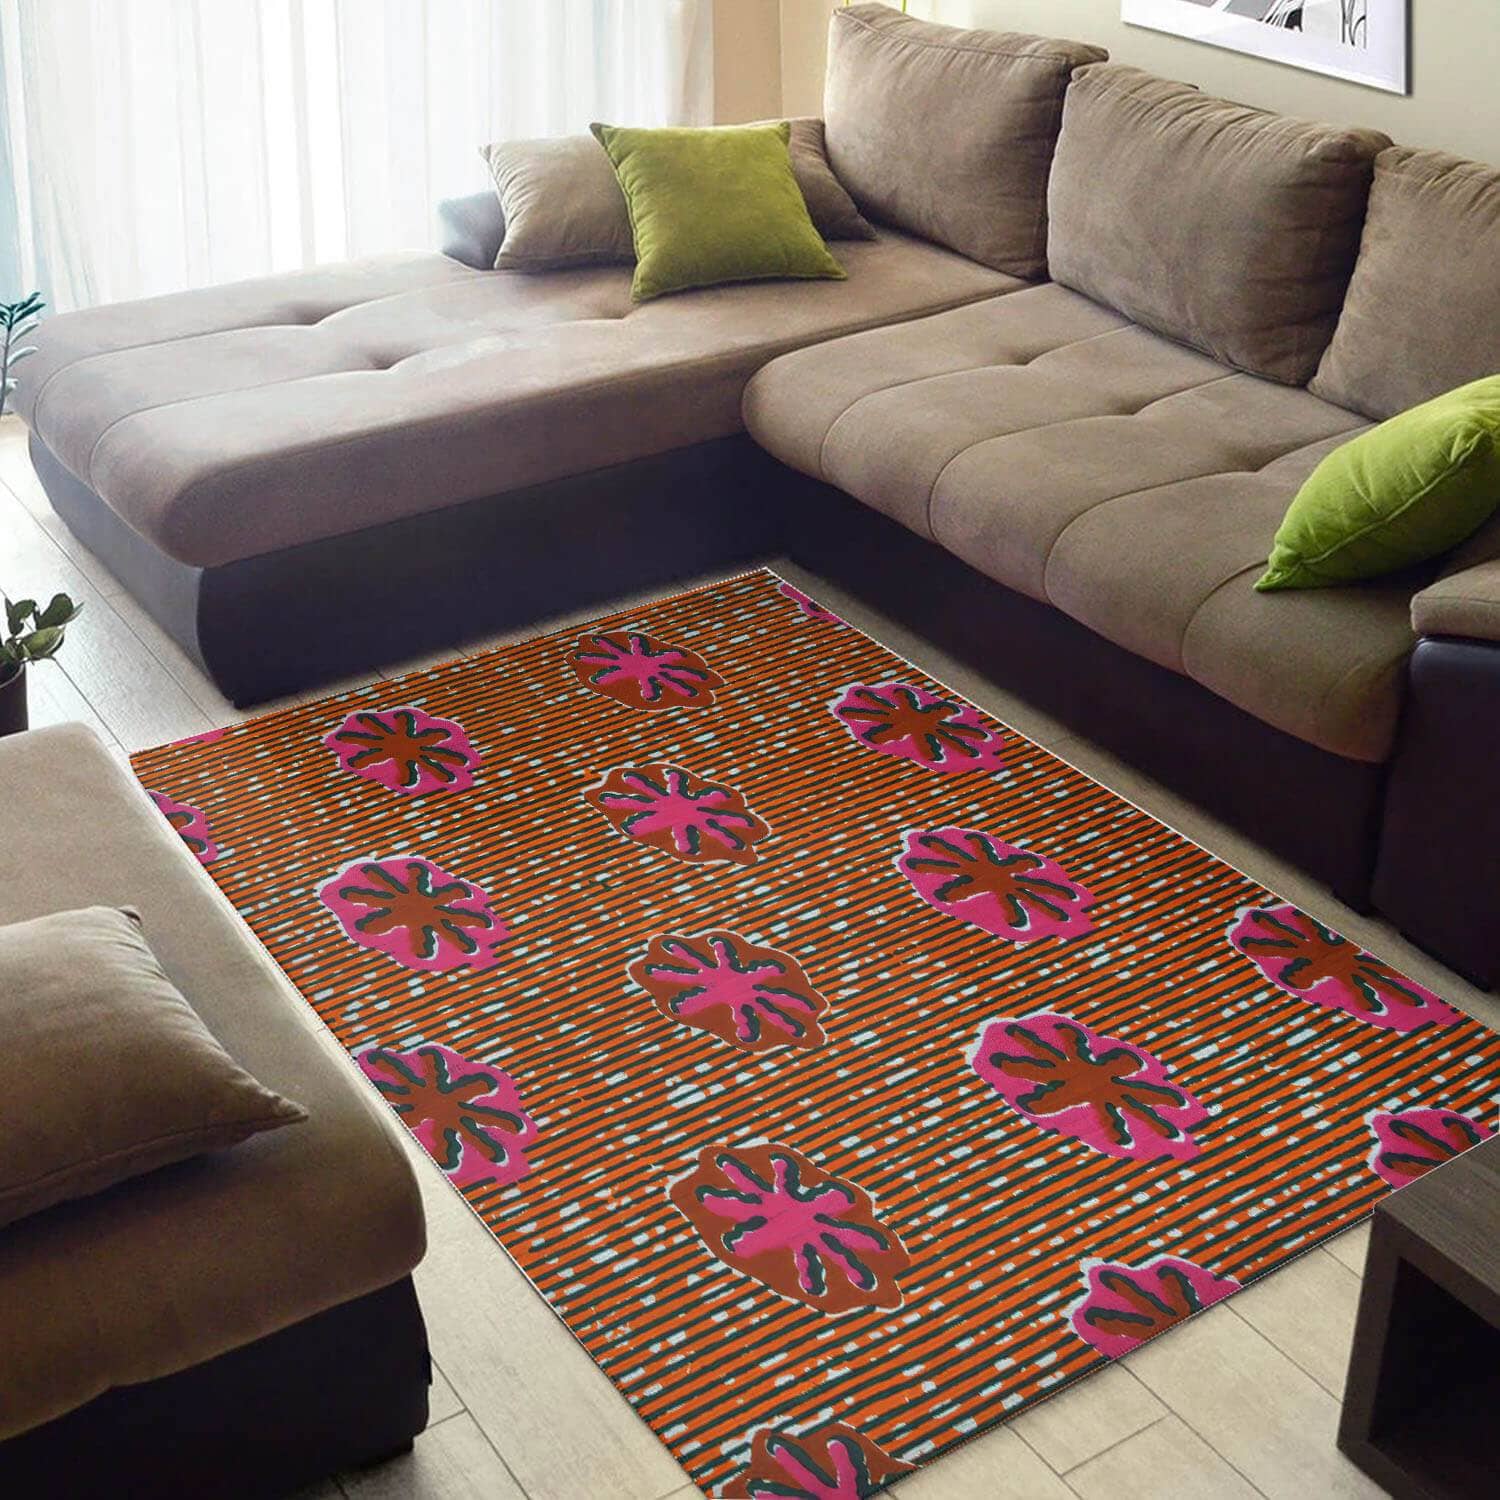 Cool African Style Awesome Afro American Ethnic Seamless Pattern Design Floor Living Room Rug